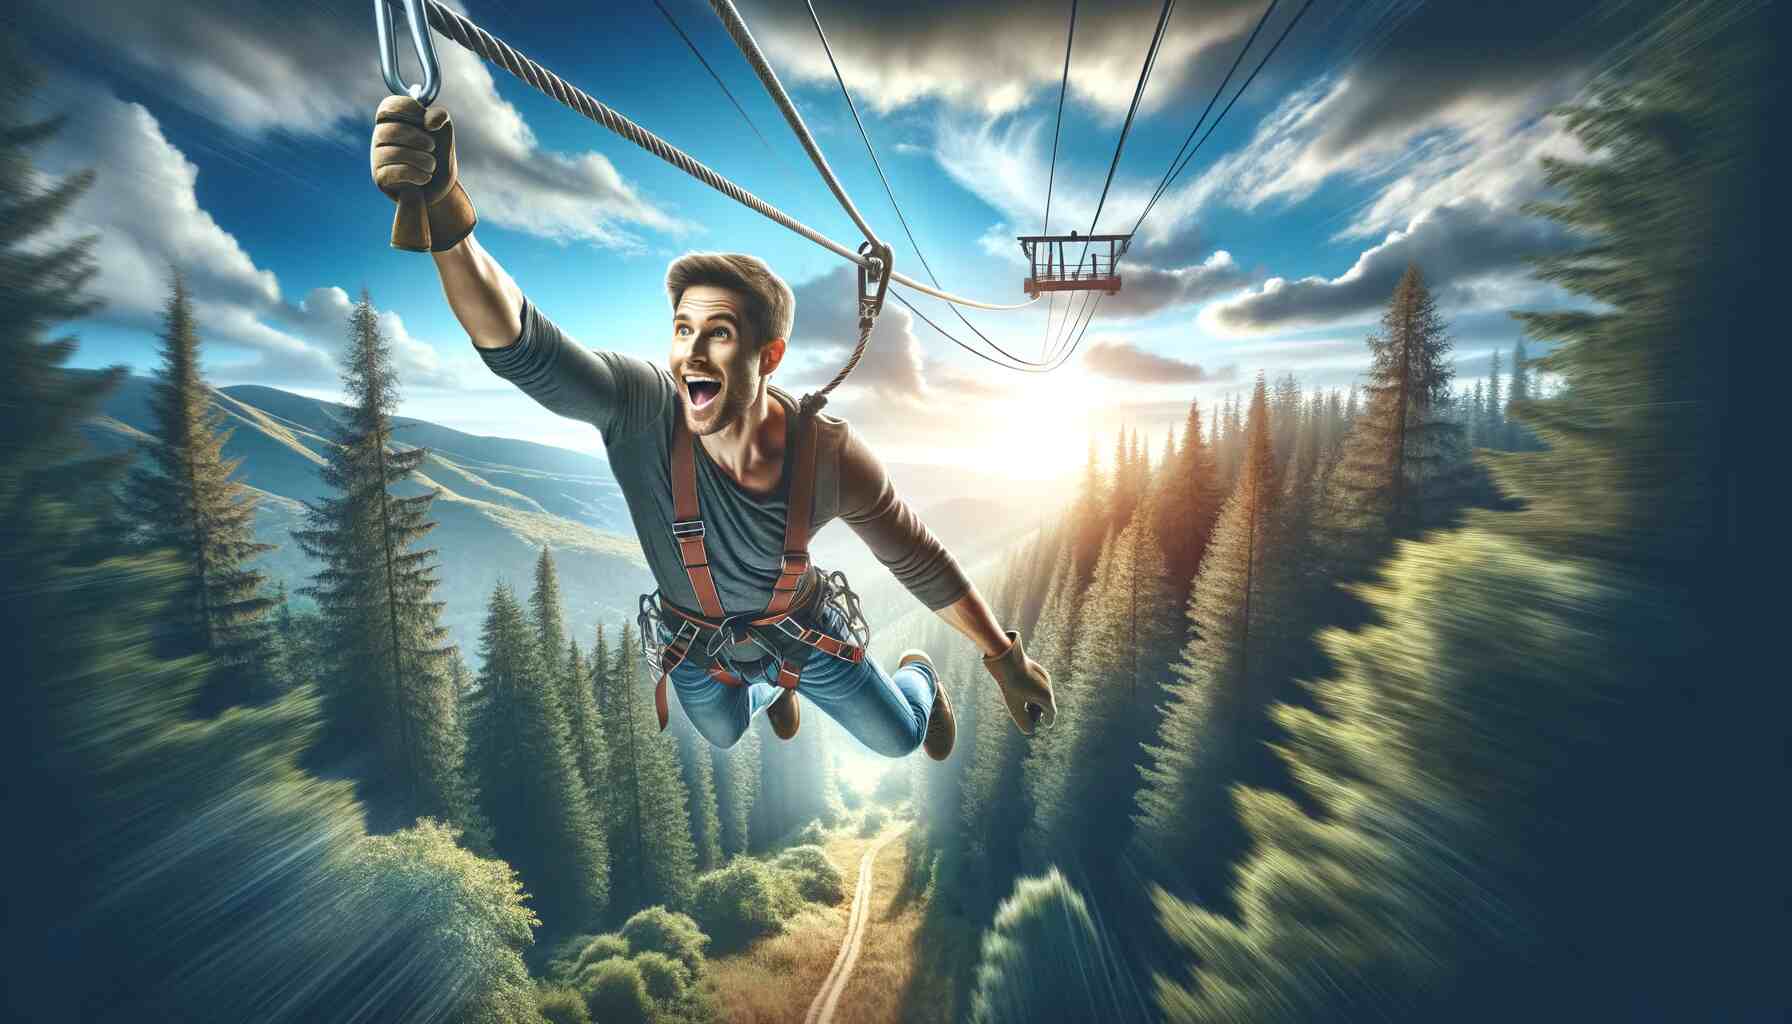 An adult ziplining over a lush green forest, under a clear blue sky. The person appears thrilled, dressed in outdoor adventure clothing with safety gear like a helmet and harness. The zipline stretches across the image, symbolizing an adventurous journey through nature